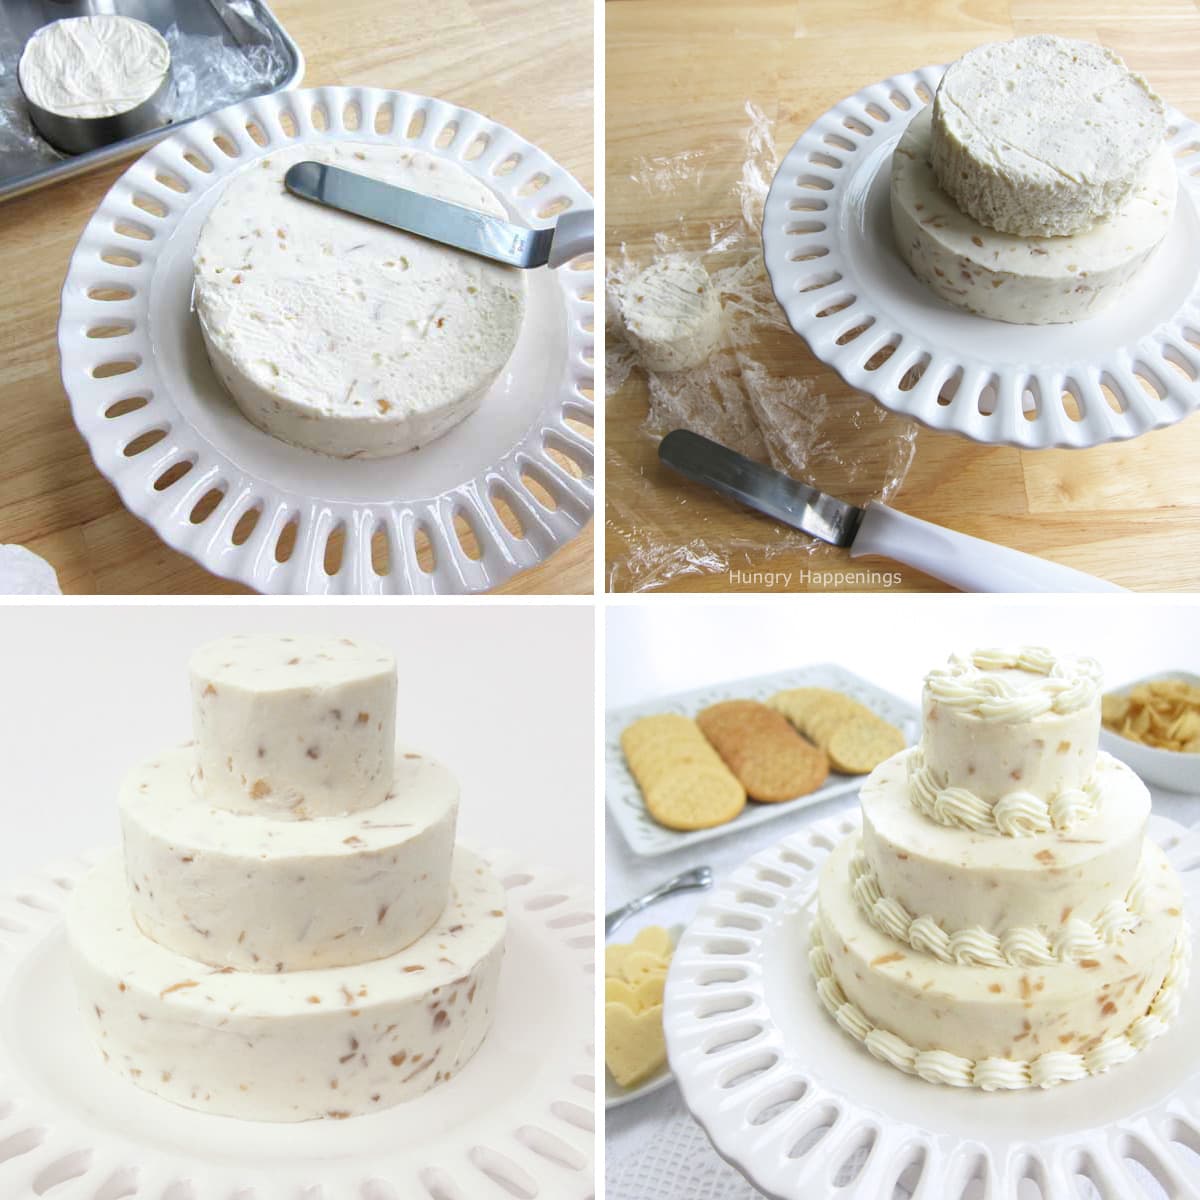 making a cheese ball wedding cake with 3 layers.